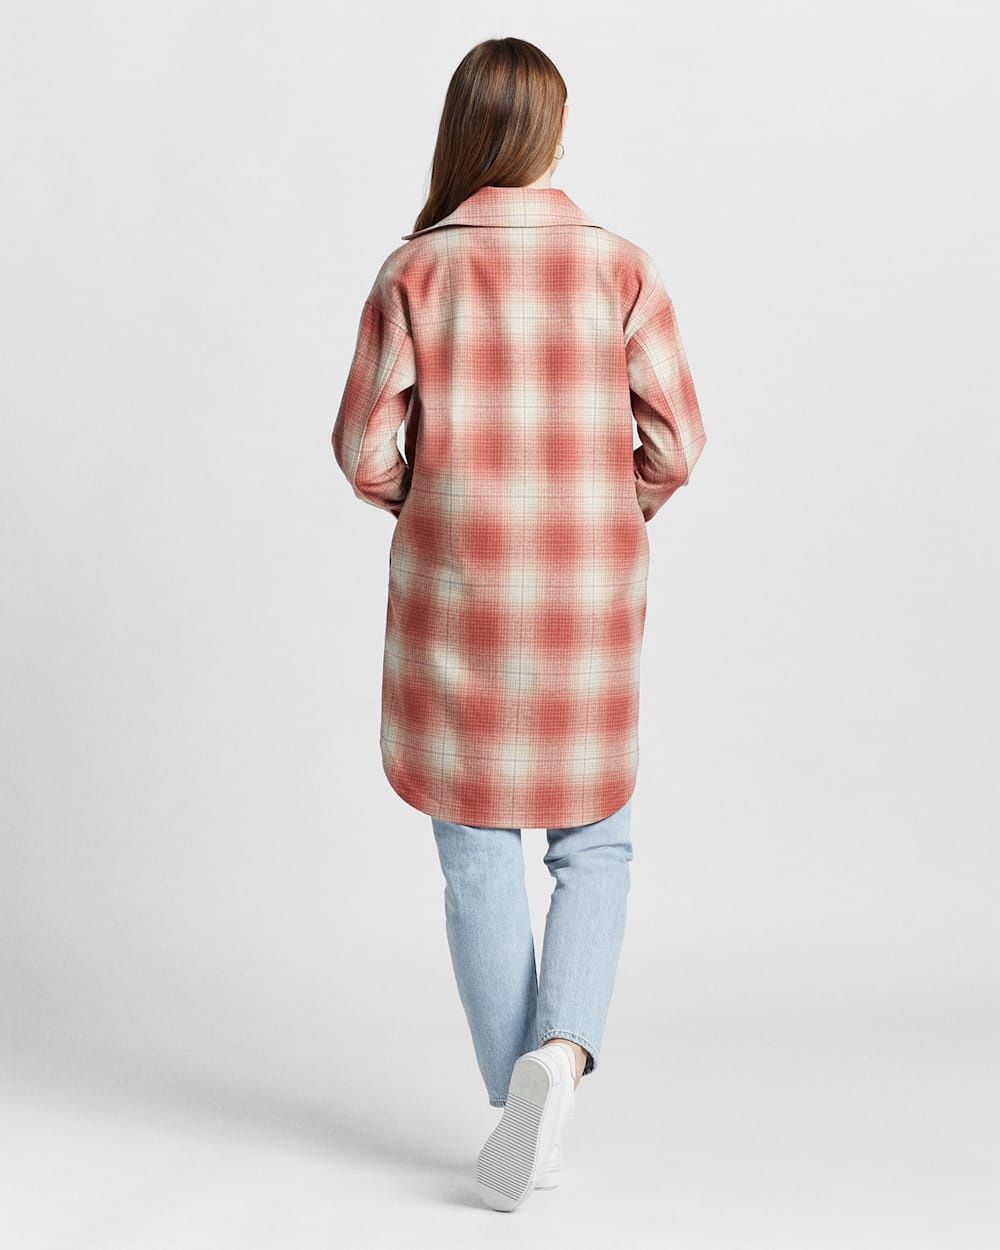 ALTERNATE VIEW OF WOMEN'S WOOL OVERSHIRT IN CORAL OMBRE PLAID image number 4